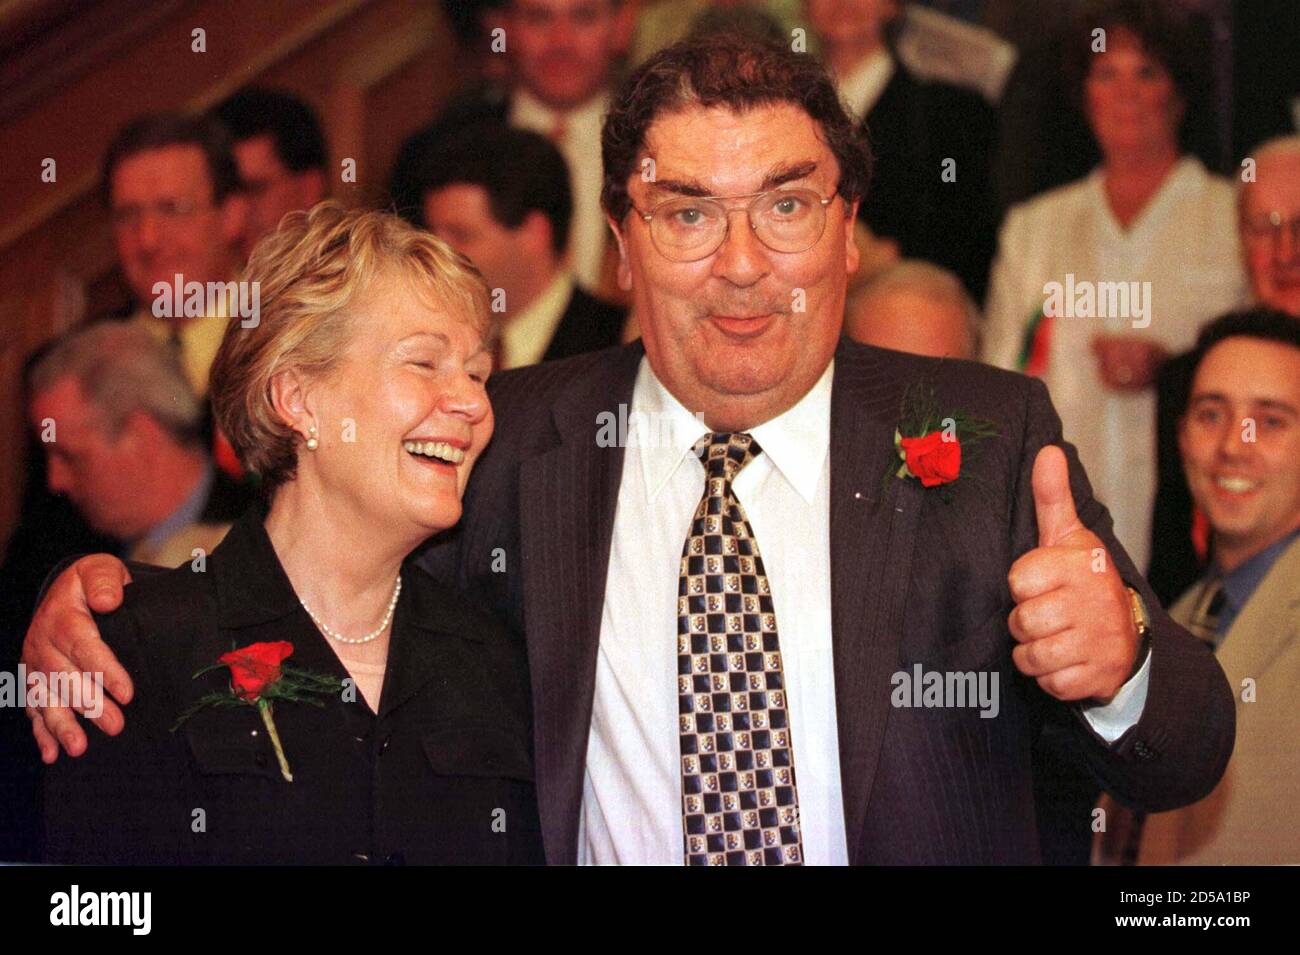 Social Democratic and Labour Party leader John Hume (R) celebrates his victory in the Foyle constituency of the new Northern Ireland Assembly with his wife Pat June 26. Counting for the 108 seat assembly takes place across Northen Ireland today but a full result may not be known until tommorrow.  DC/EB Stock Photo